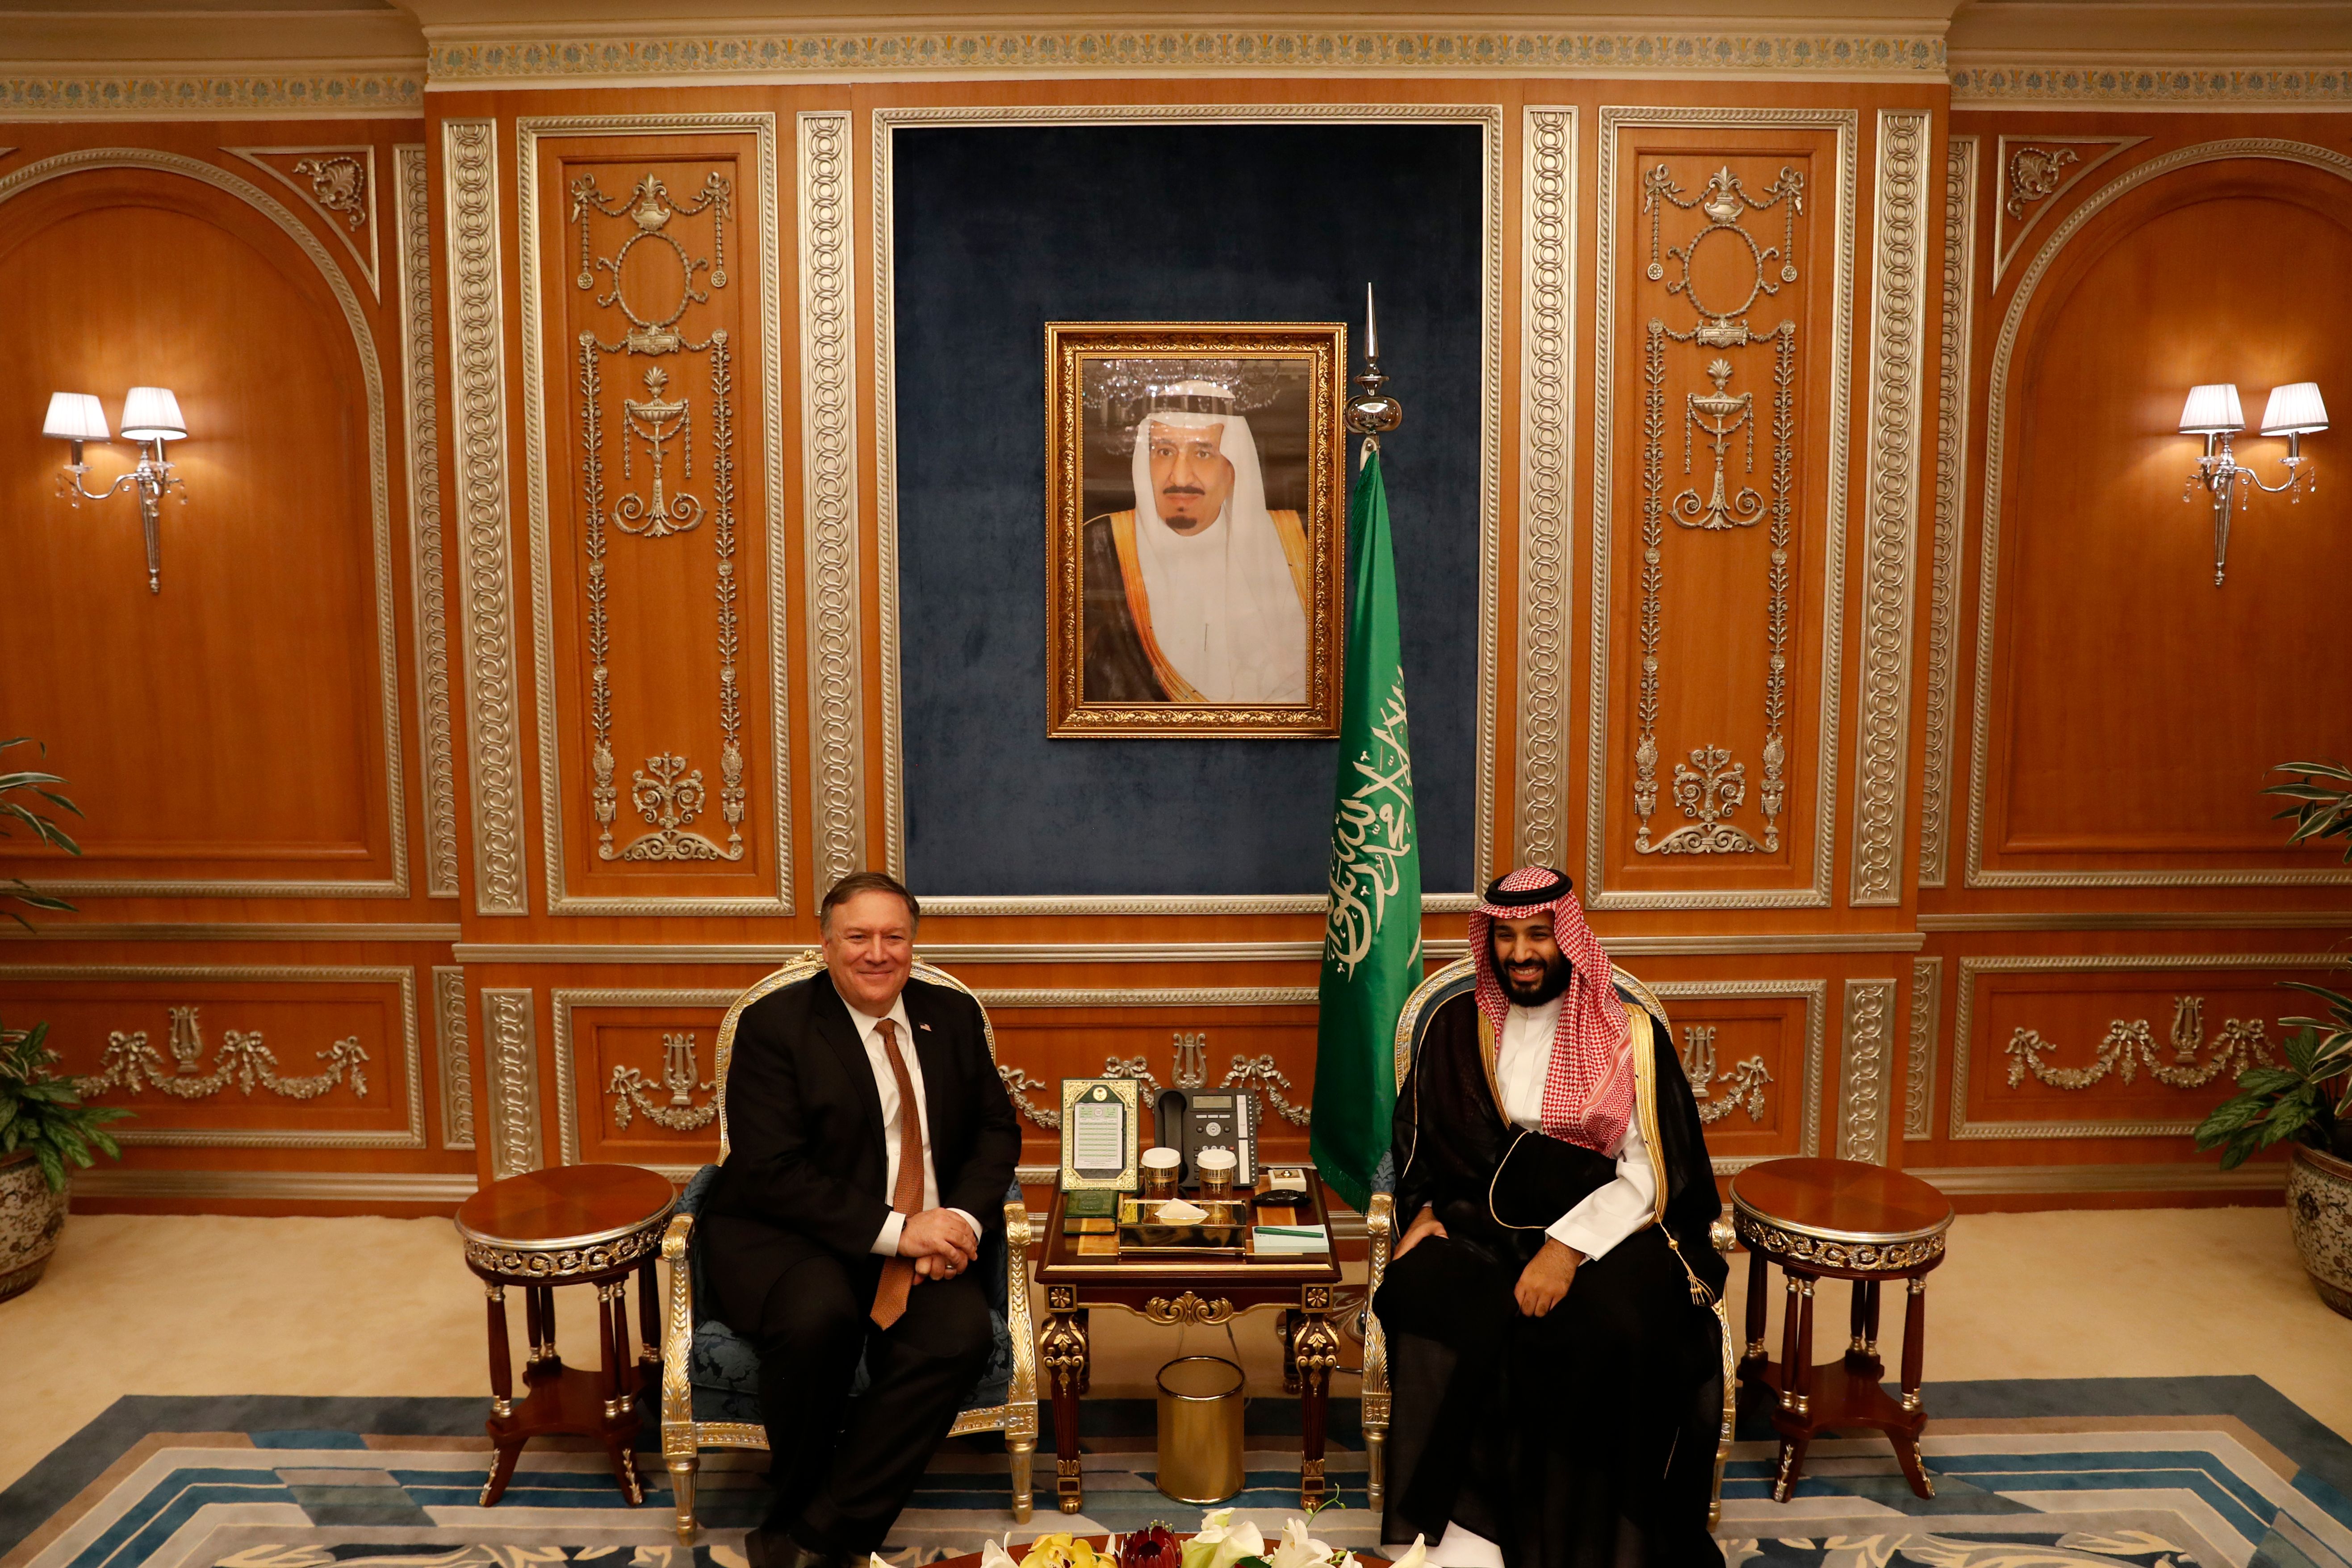 US Secretary of State Mike Pompeo (L) meets with Saudi Crown Prince Mohammed bin Salman in Riyadh, on October 16, 2018. - Pompeo held talks with Saudi King Salman seeking answers about the disappearance of journalist Jamal Khashoggi, amid US media reports the kingdom may be mulling an admission he died during a botched interrogation. (Photo by LEAH MILLIS / POOL / AFP) 